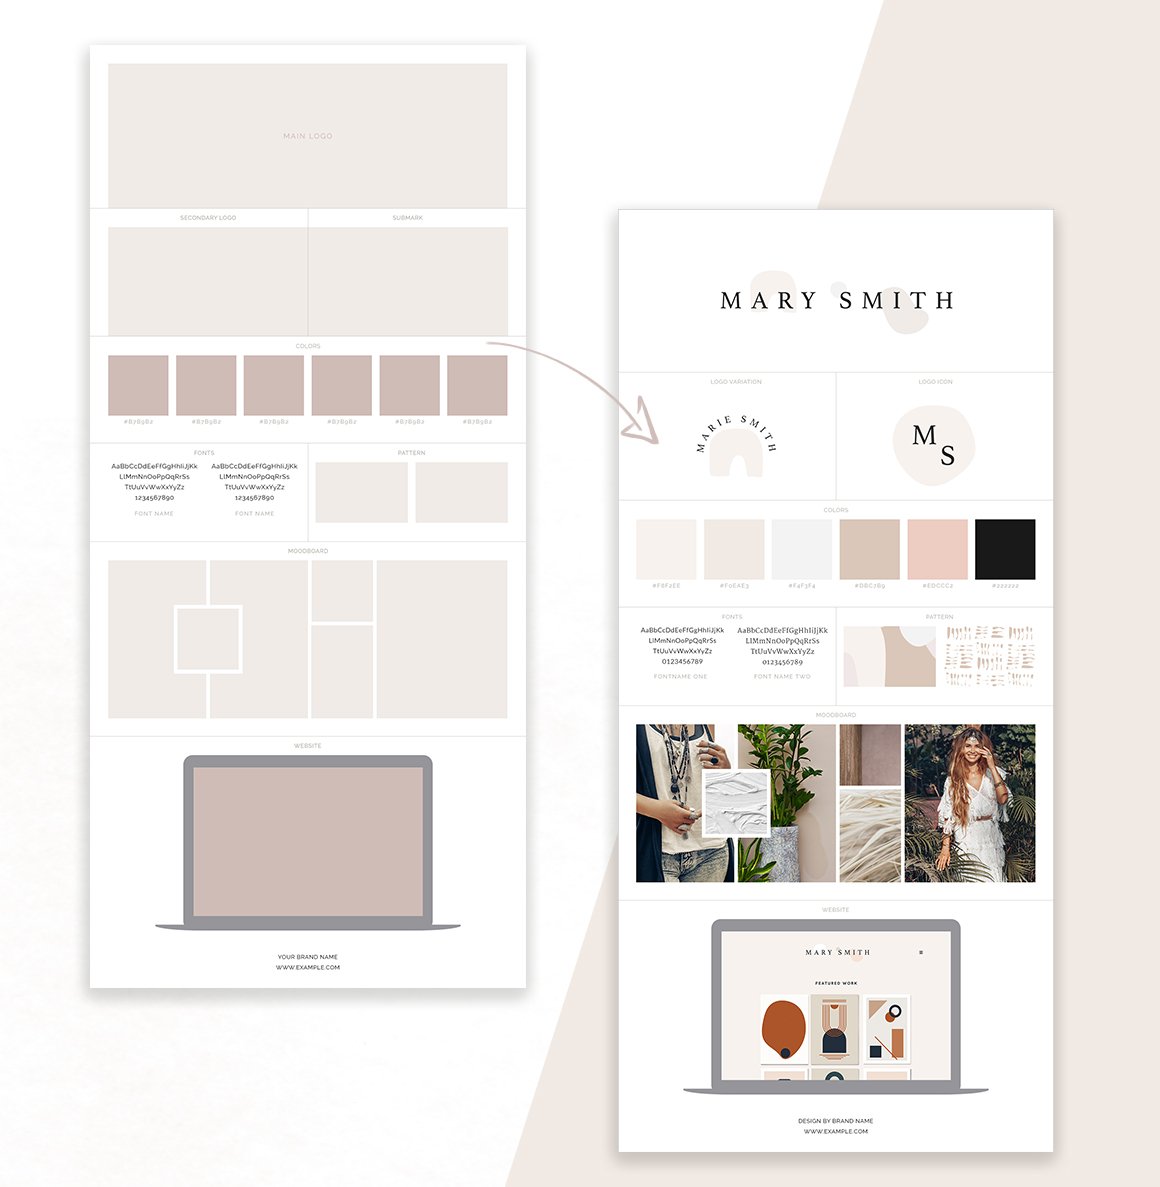 Brand Board Layout Template